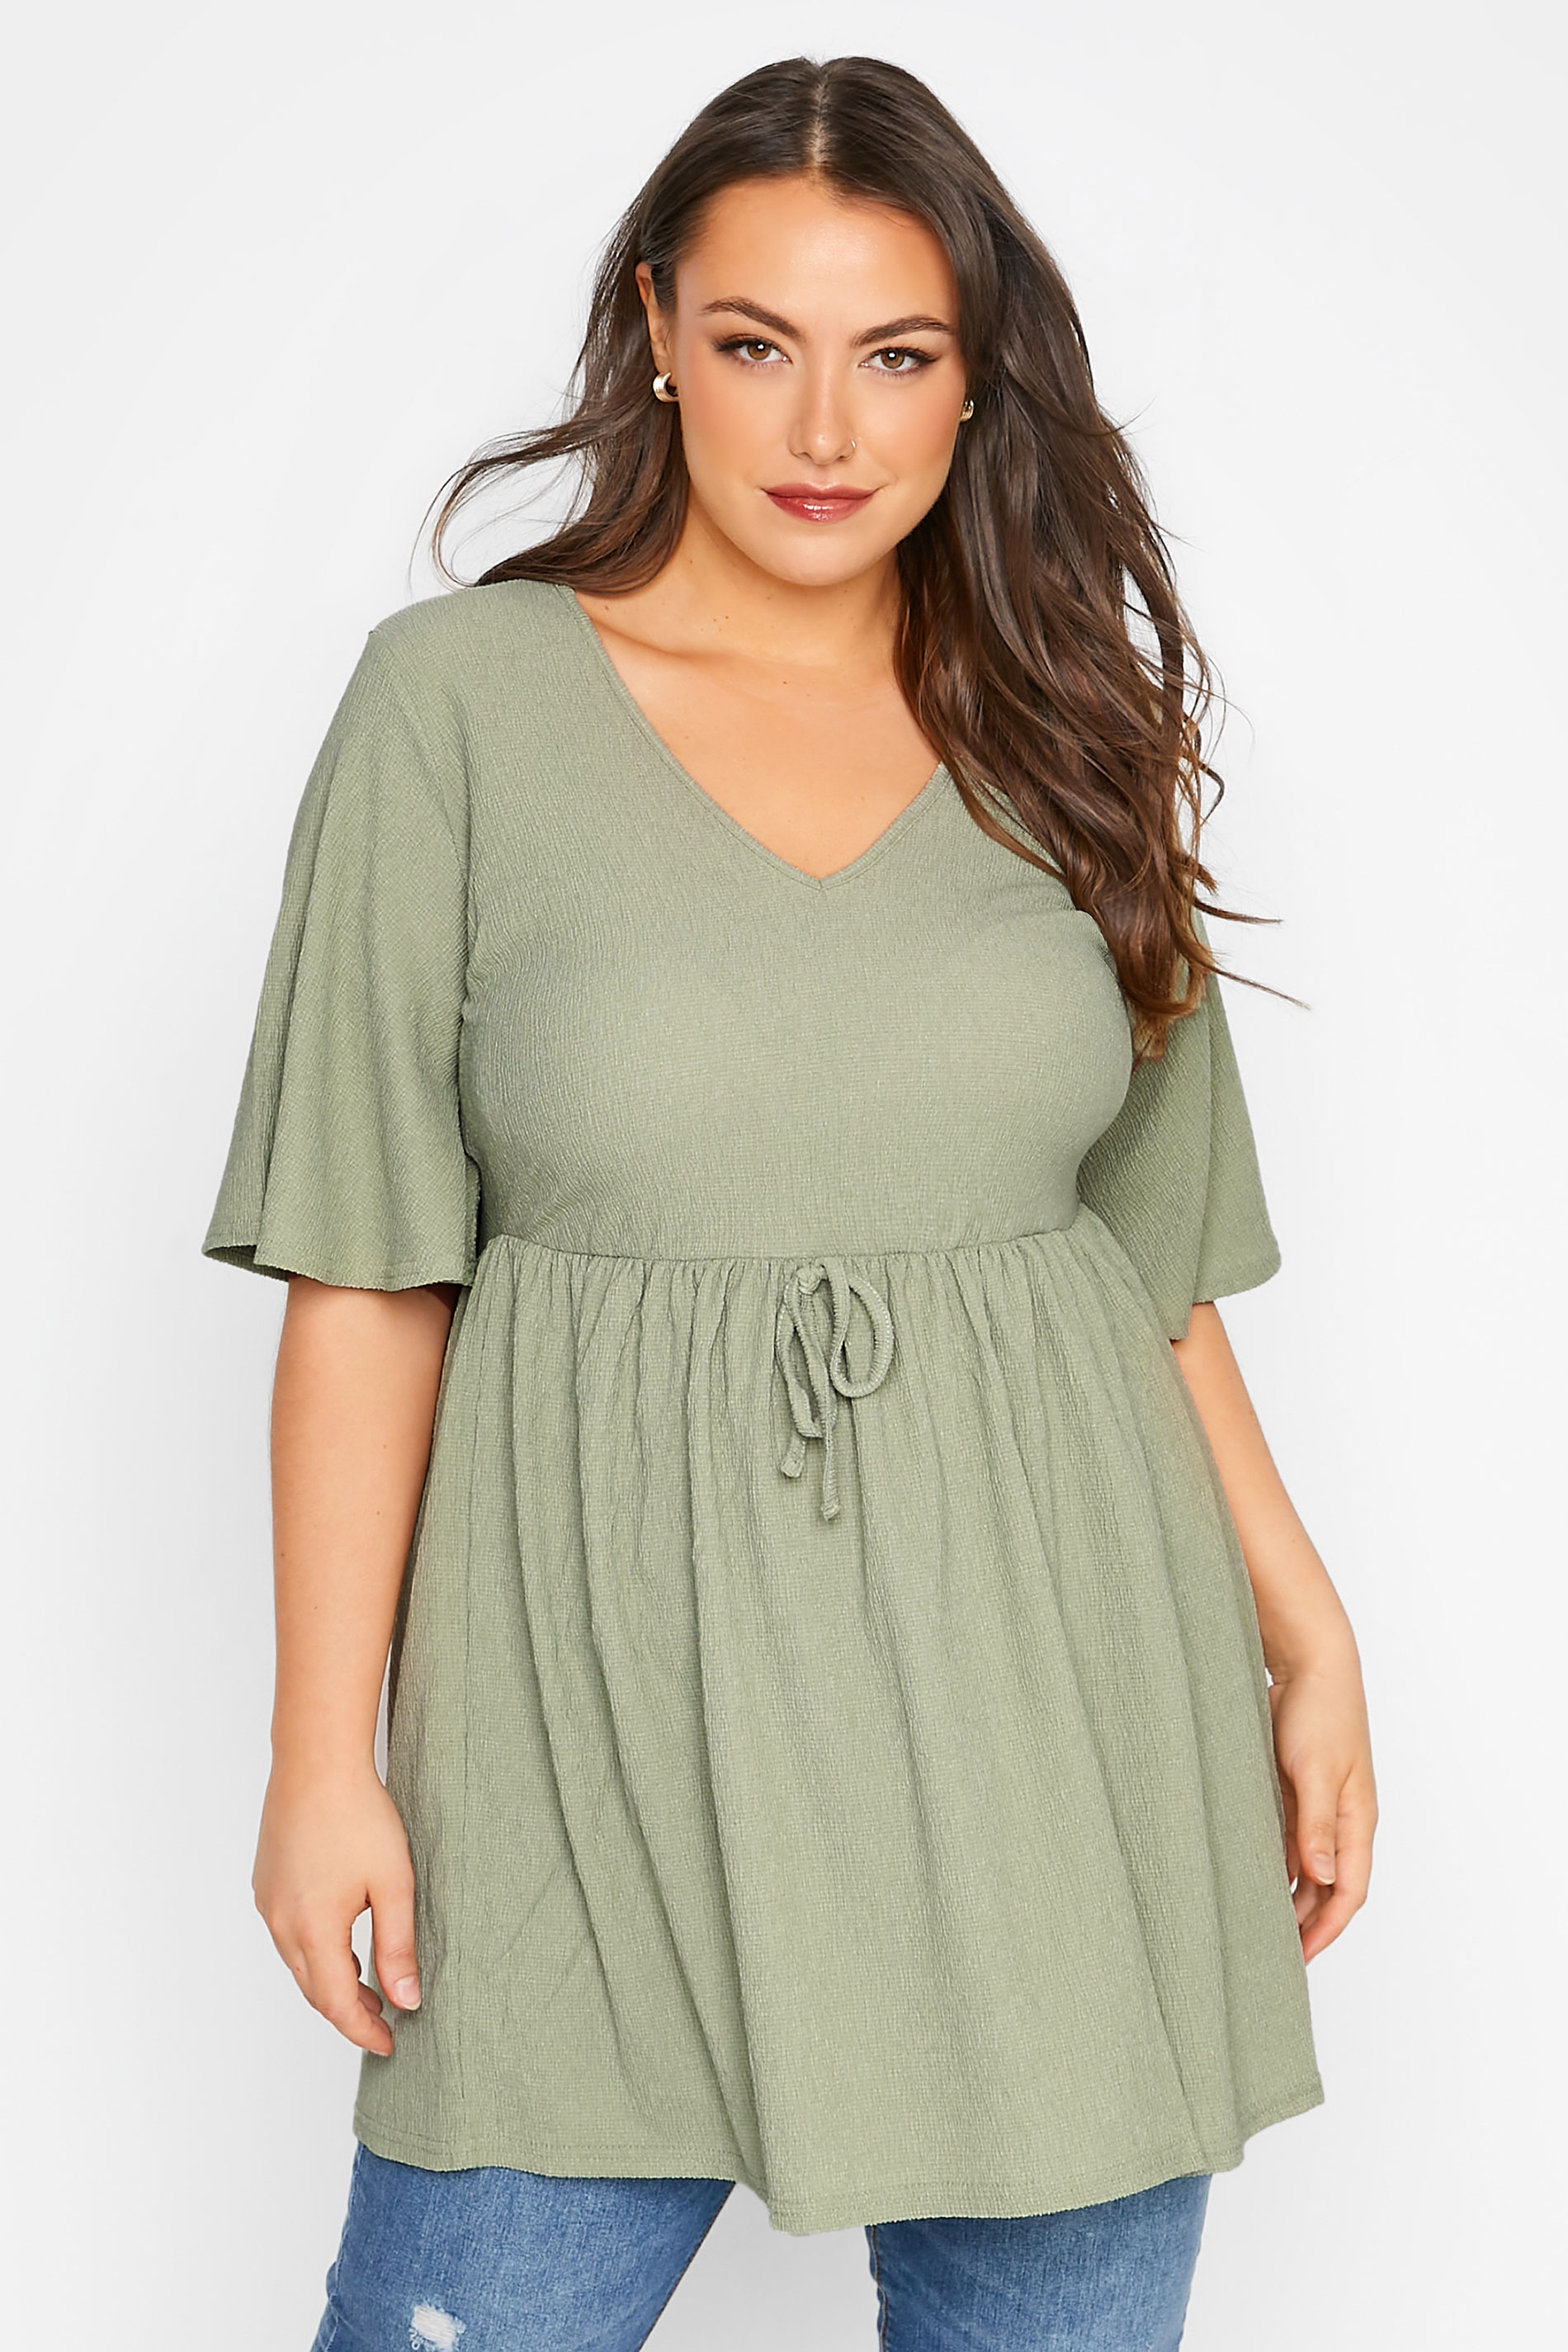 Grande taille  Tops Grande taille  Tops Casual | LIMITED COLLECTION - Top Vert Pastel Manches Courtes Ficelle - GR27110